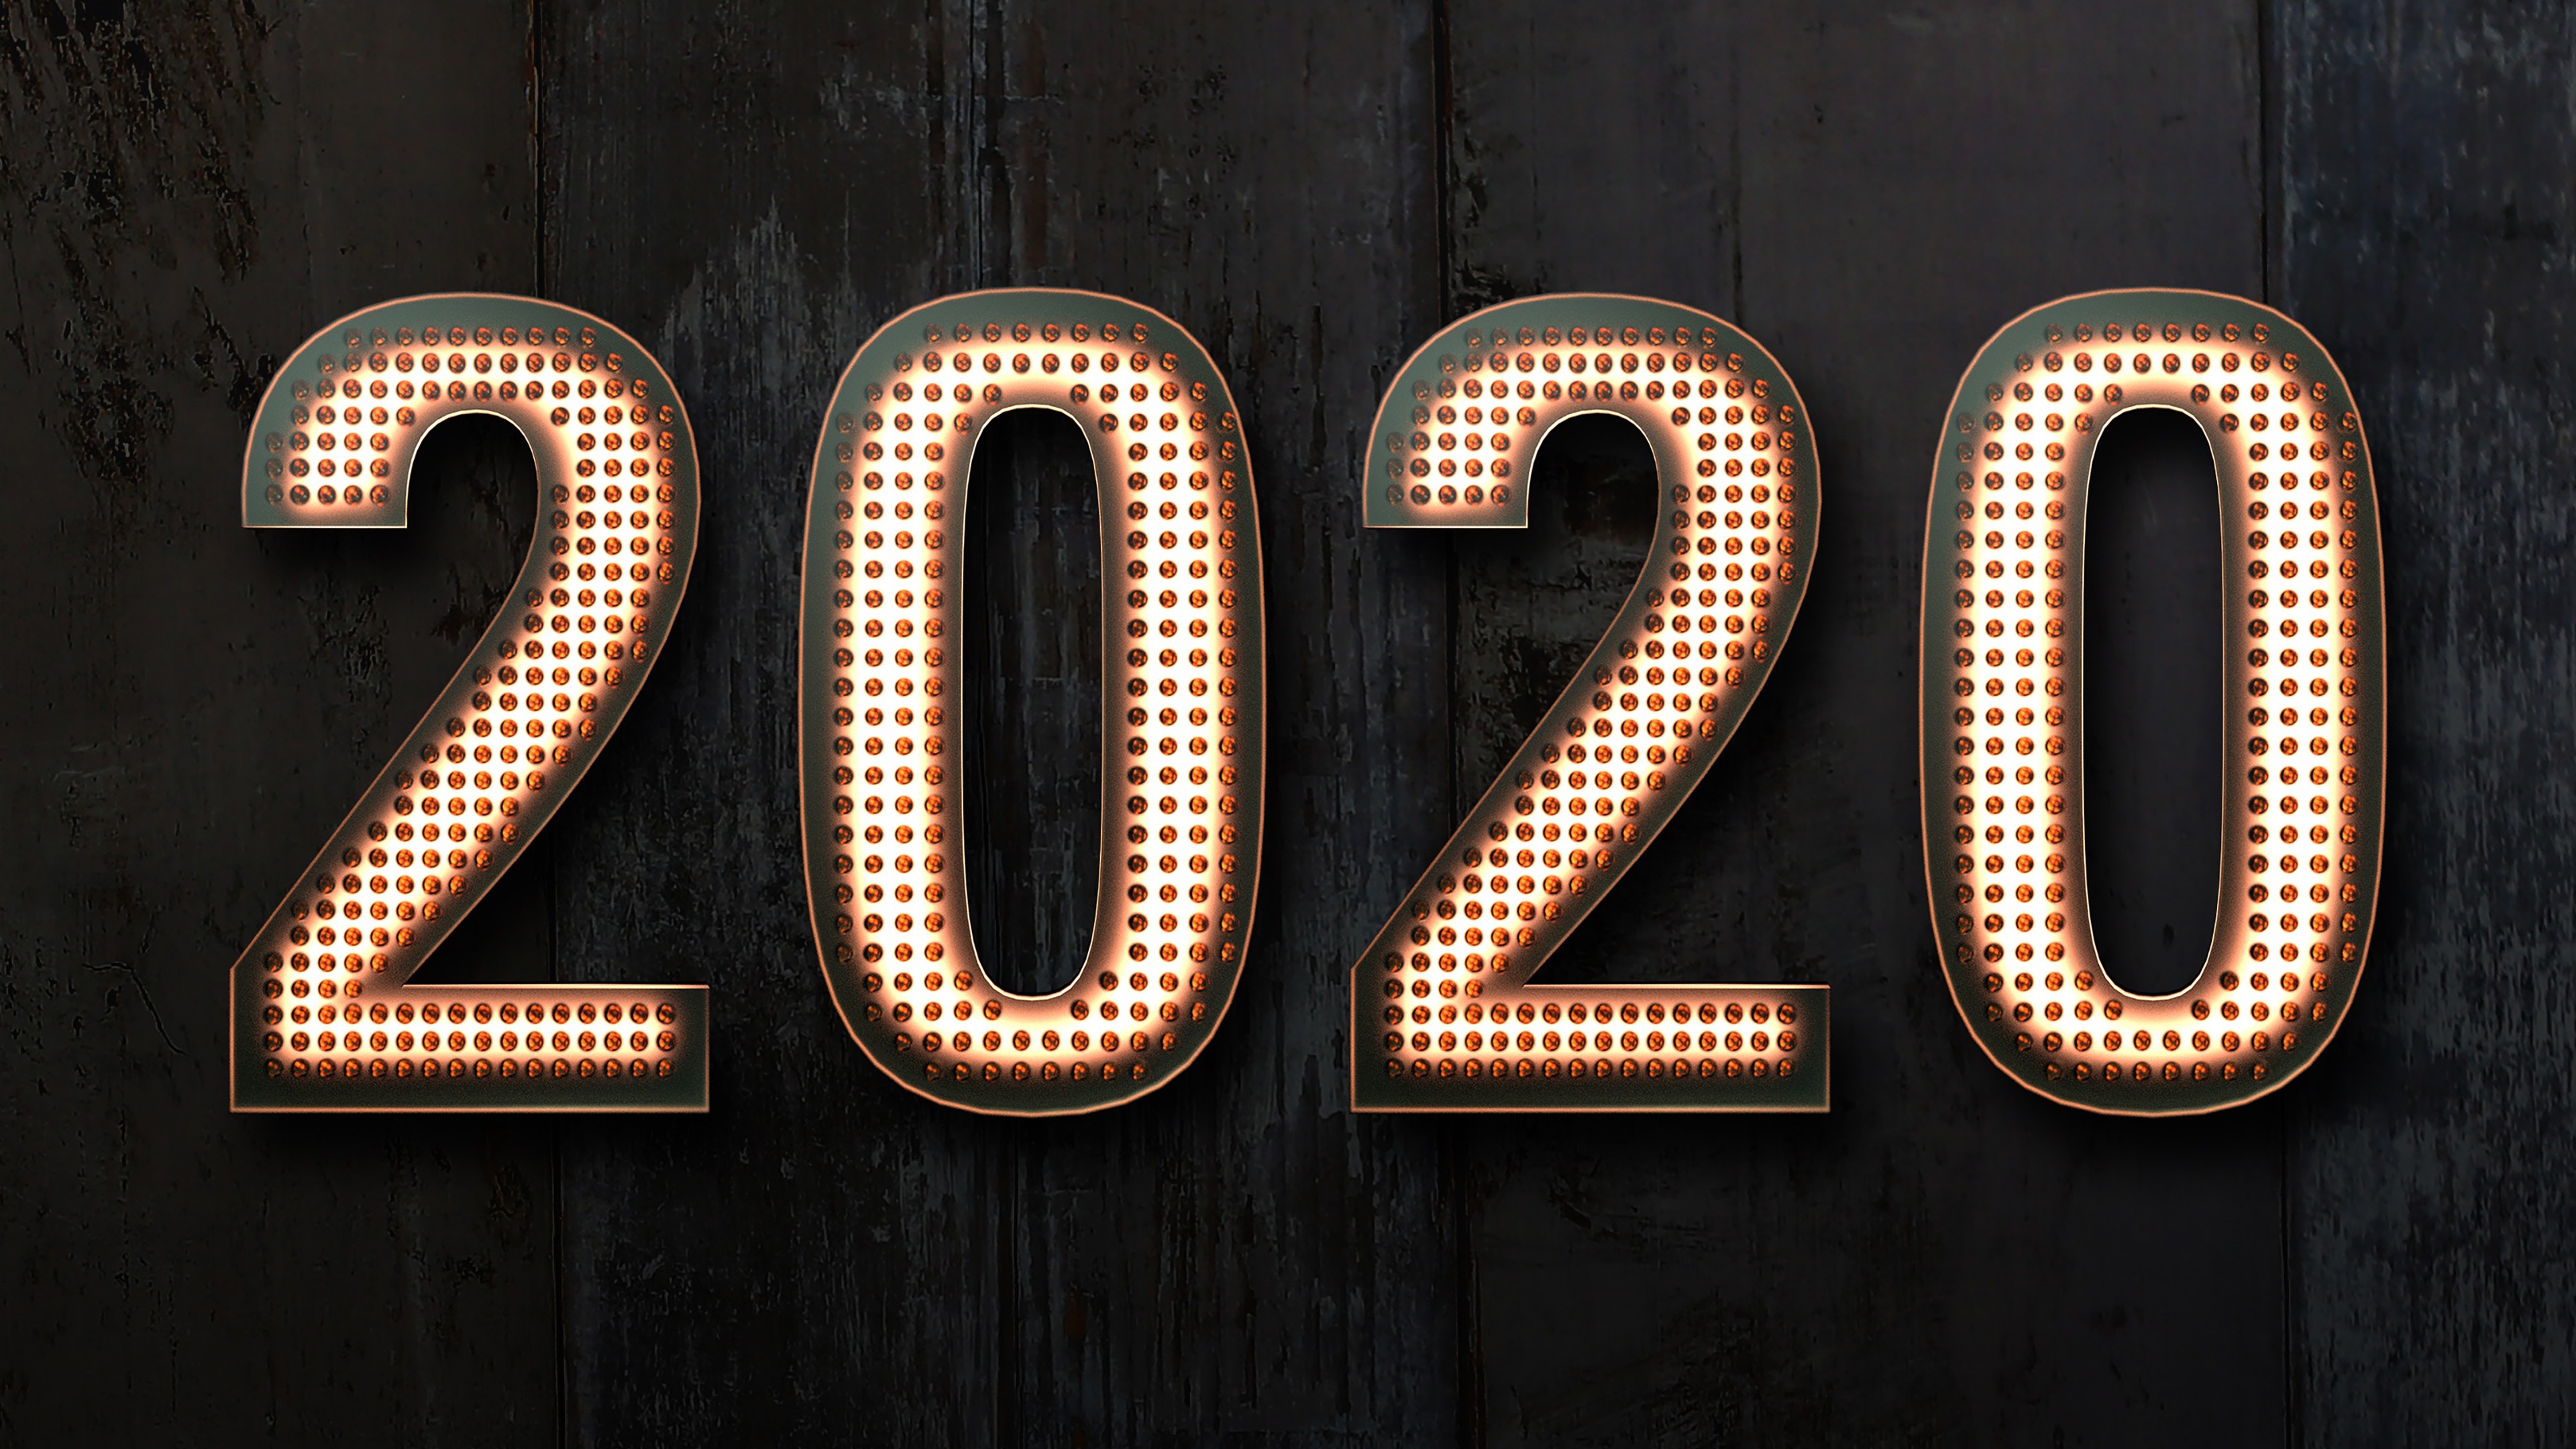 DOWNLOAD NEW YEAR 2020 4K WALLPAPERS DOWNLOAD HD